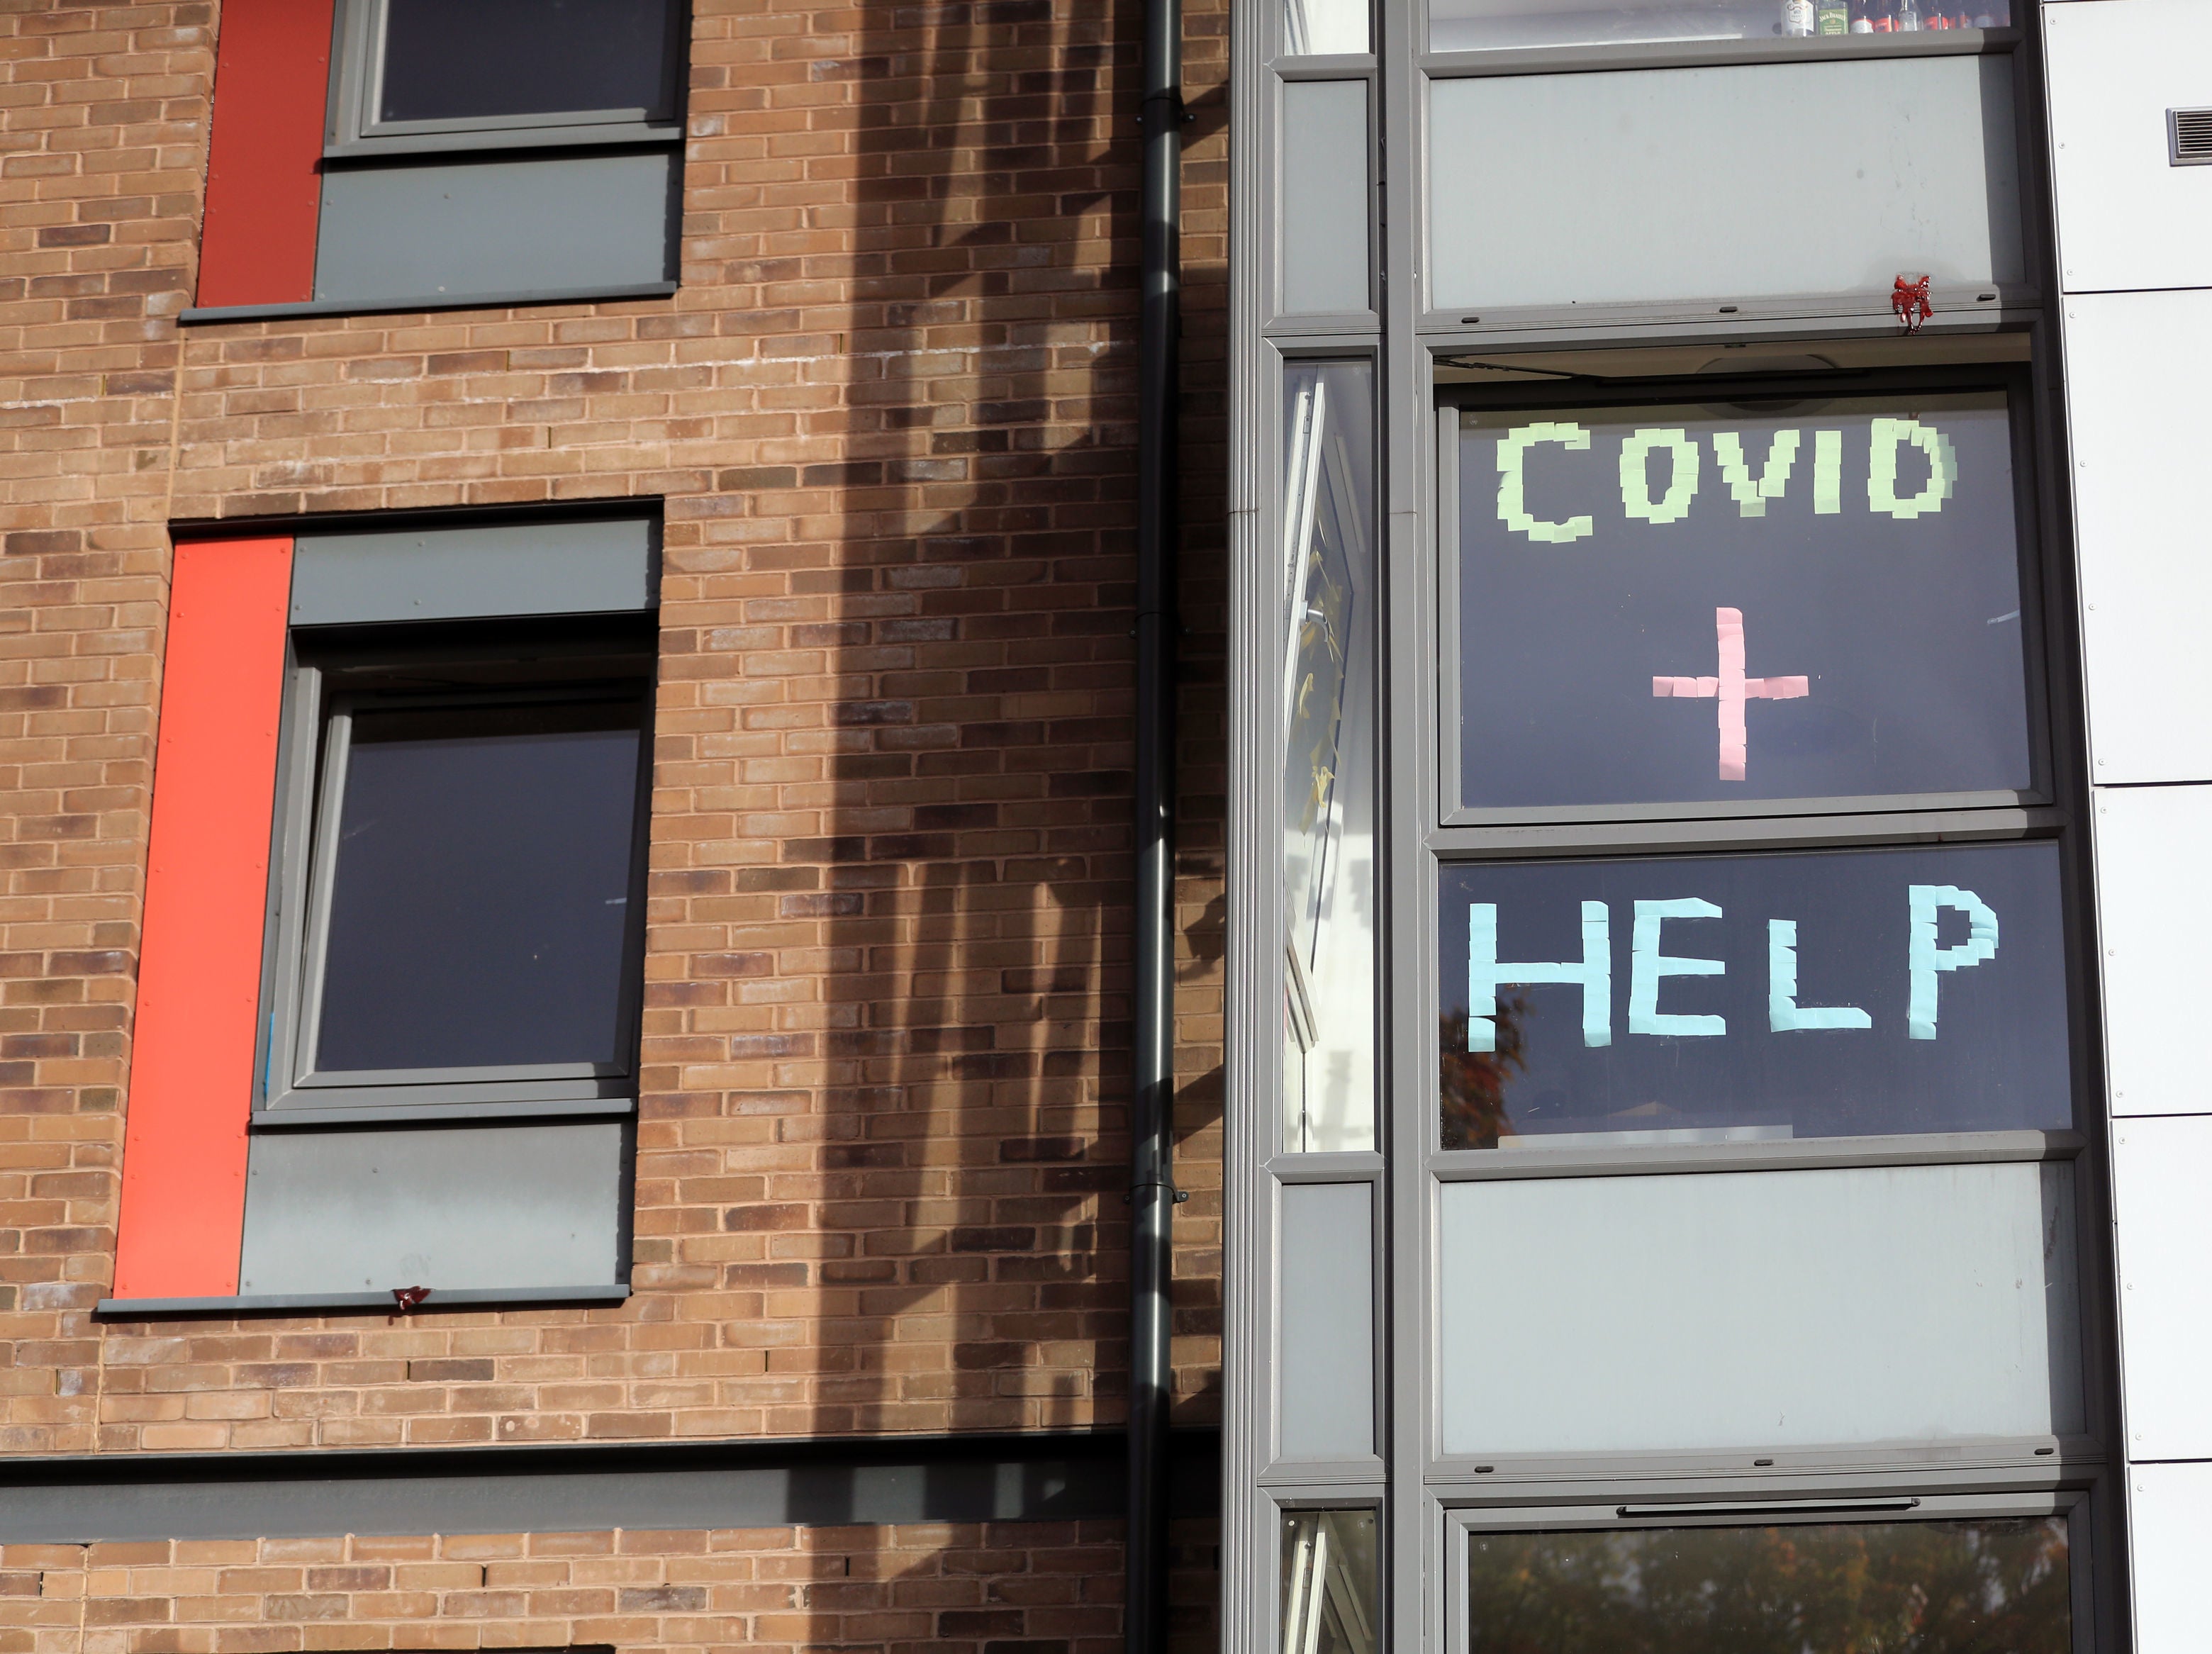 A sign in the window of the student accommodation at Nottingham Trent University in Nottingham